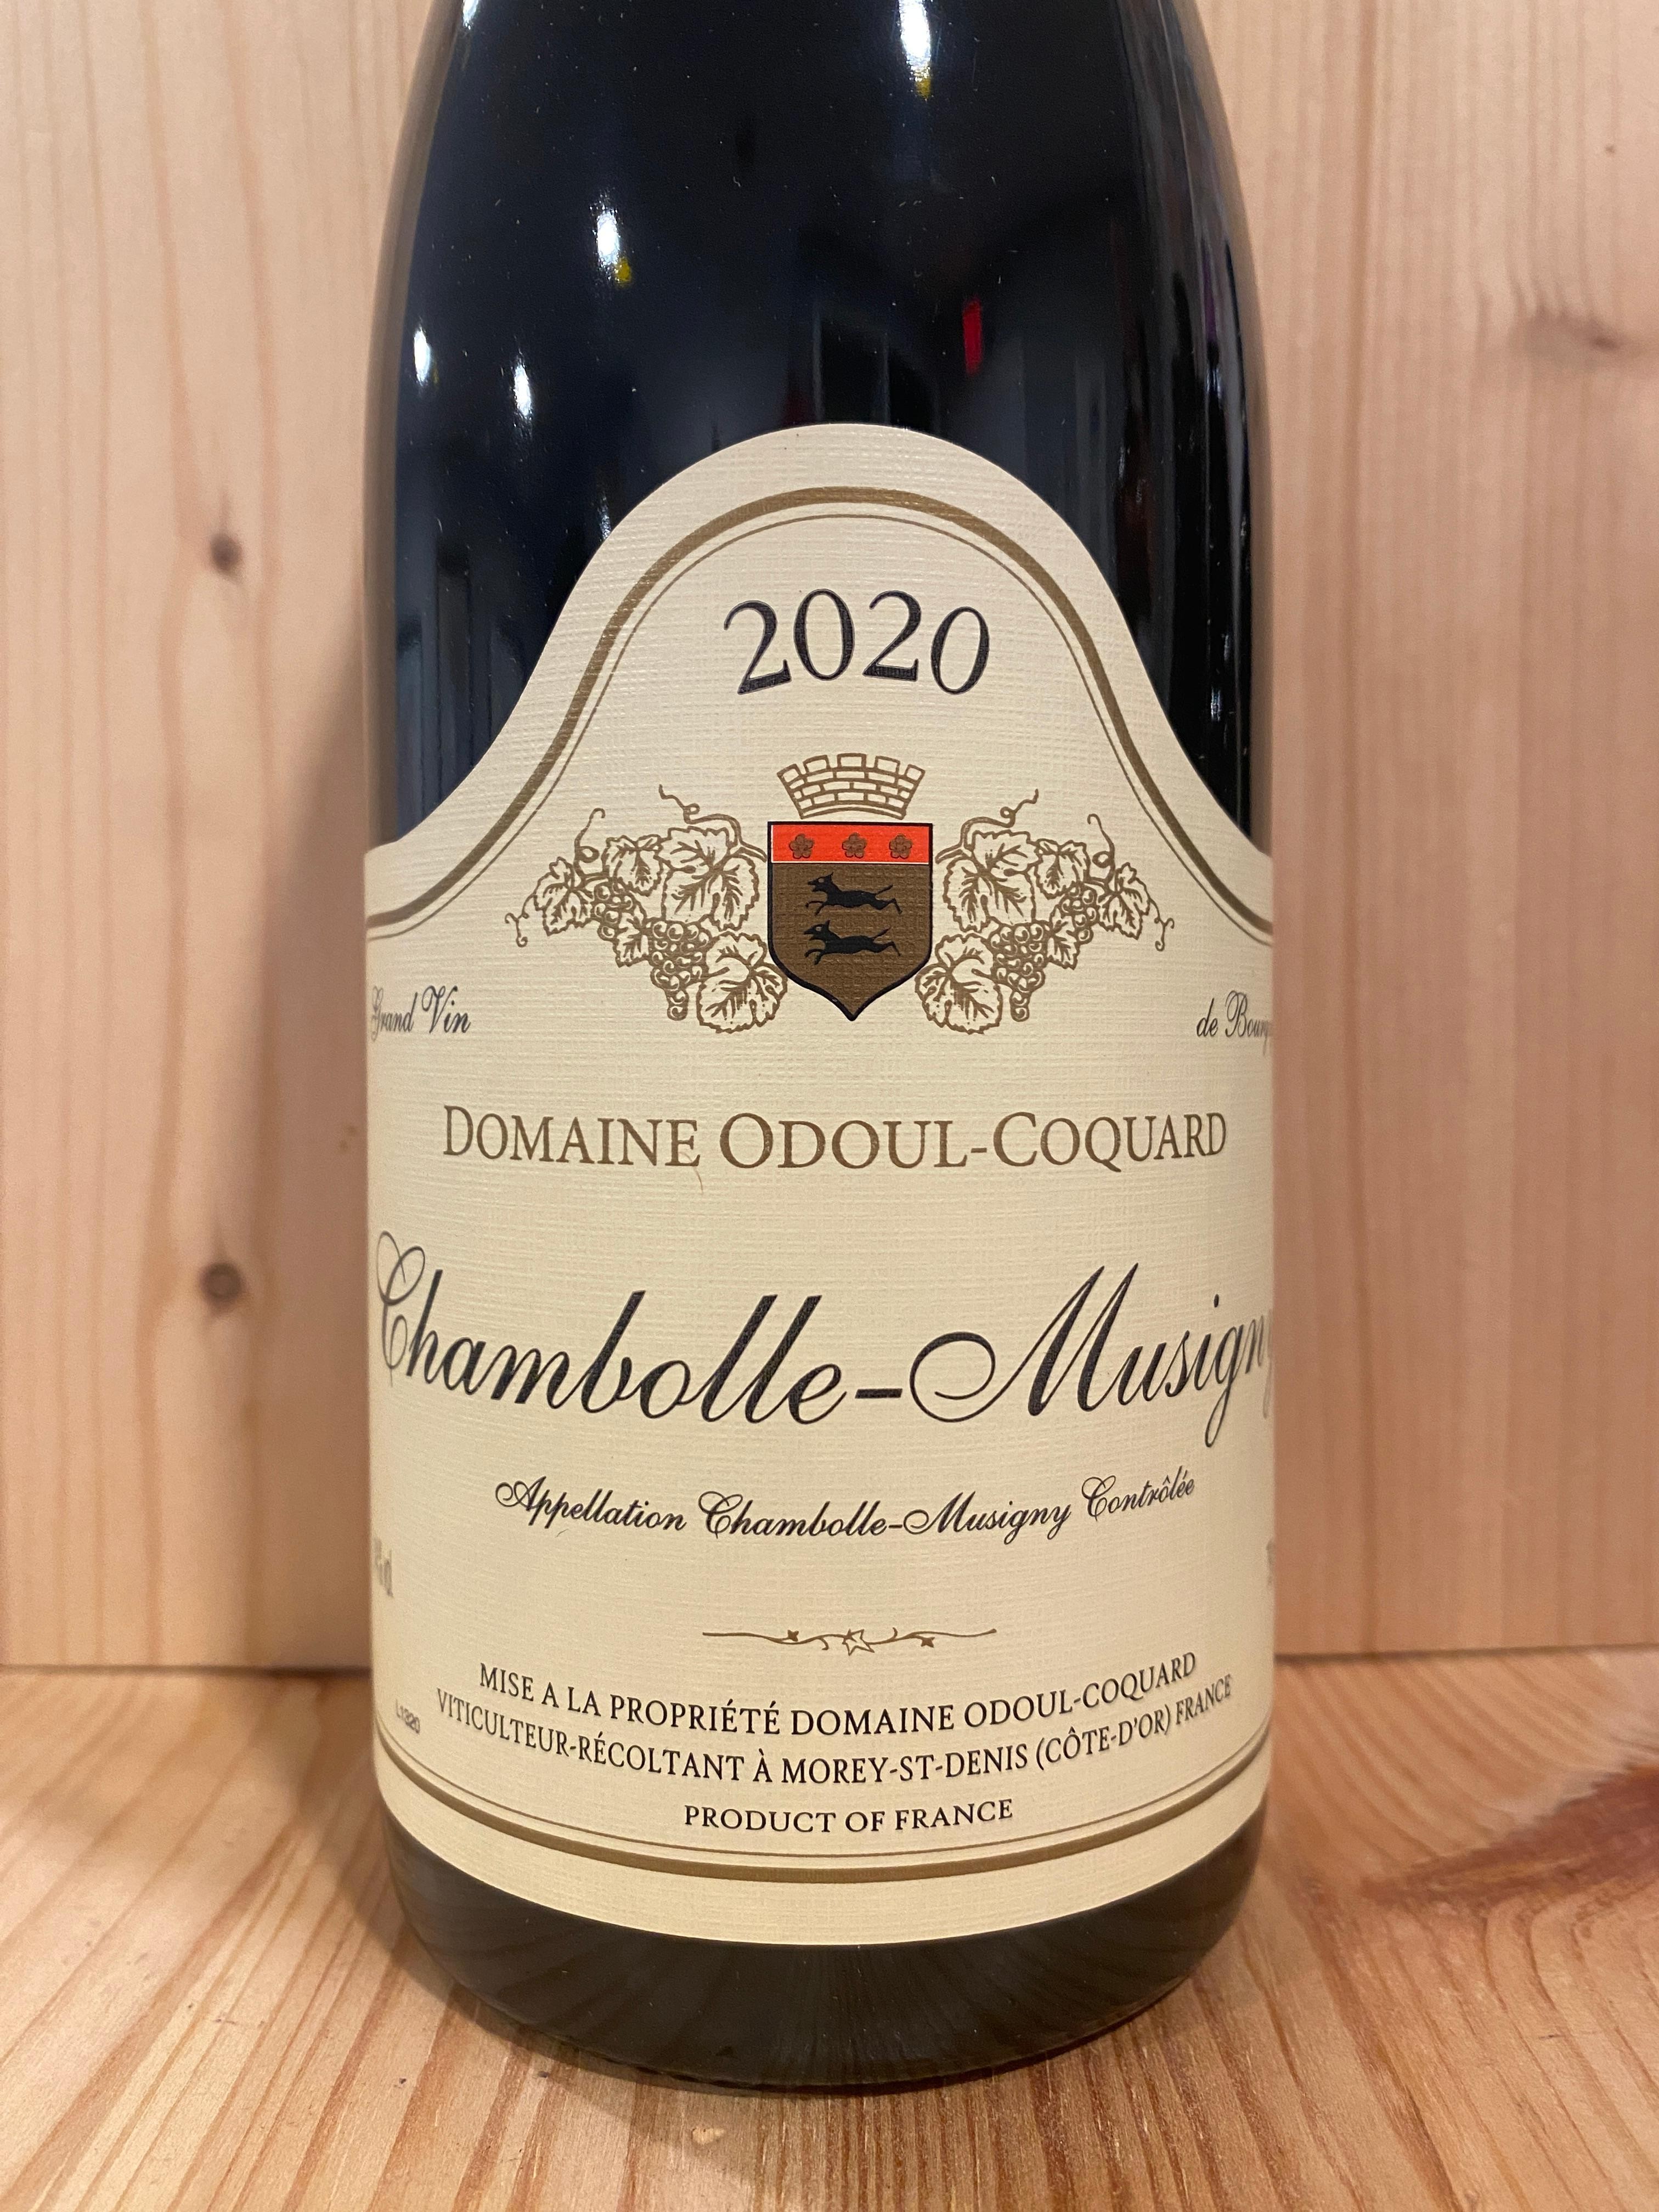 Dom. Odoul-Coquard Chambolle-Musigny 2020: Côte de Nuits, Burgundy, France